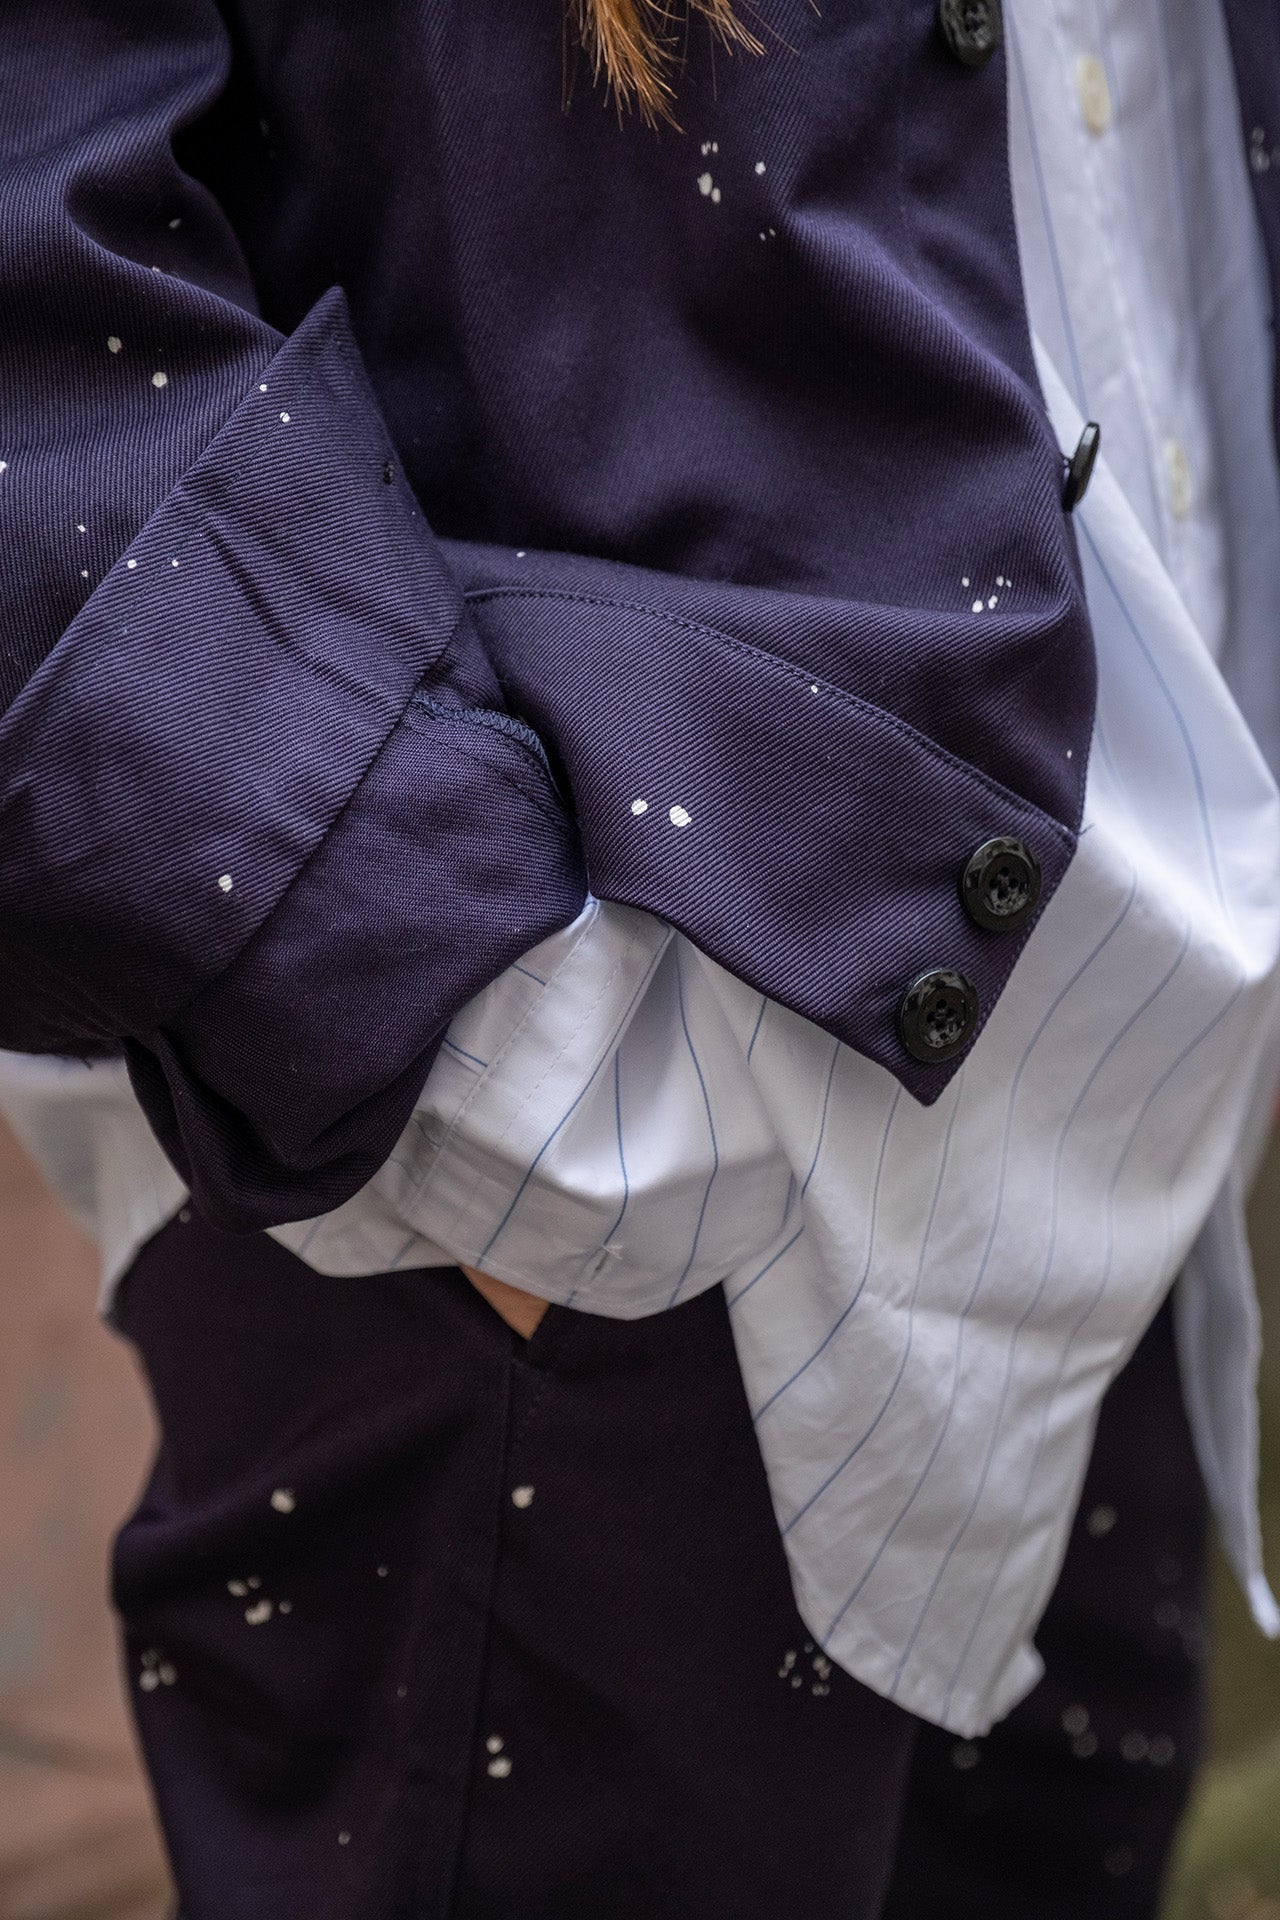 Close-up of hand-painted details on the Crest Men's jacket.